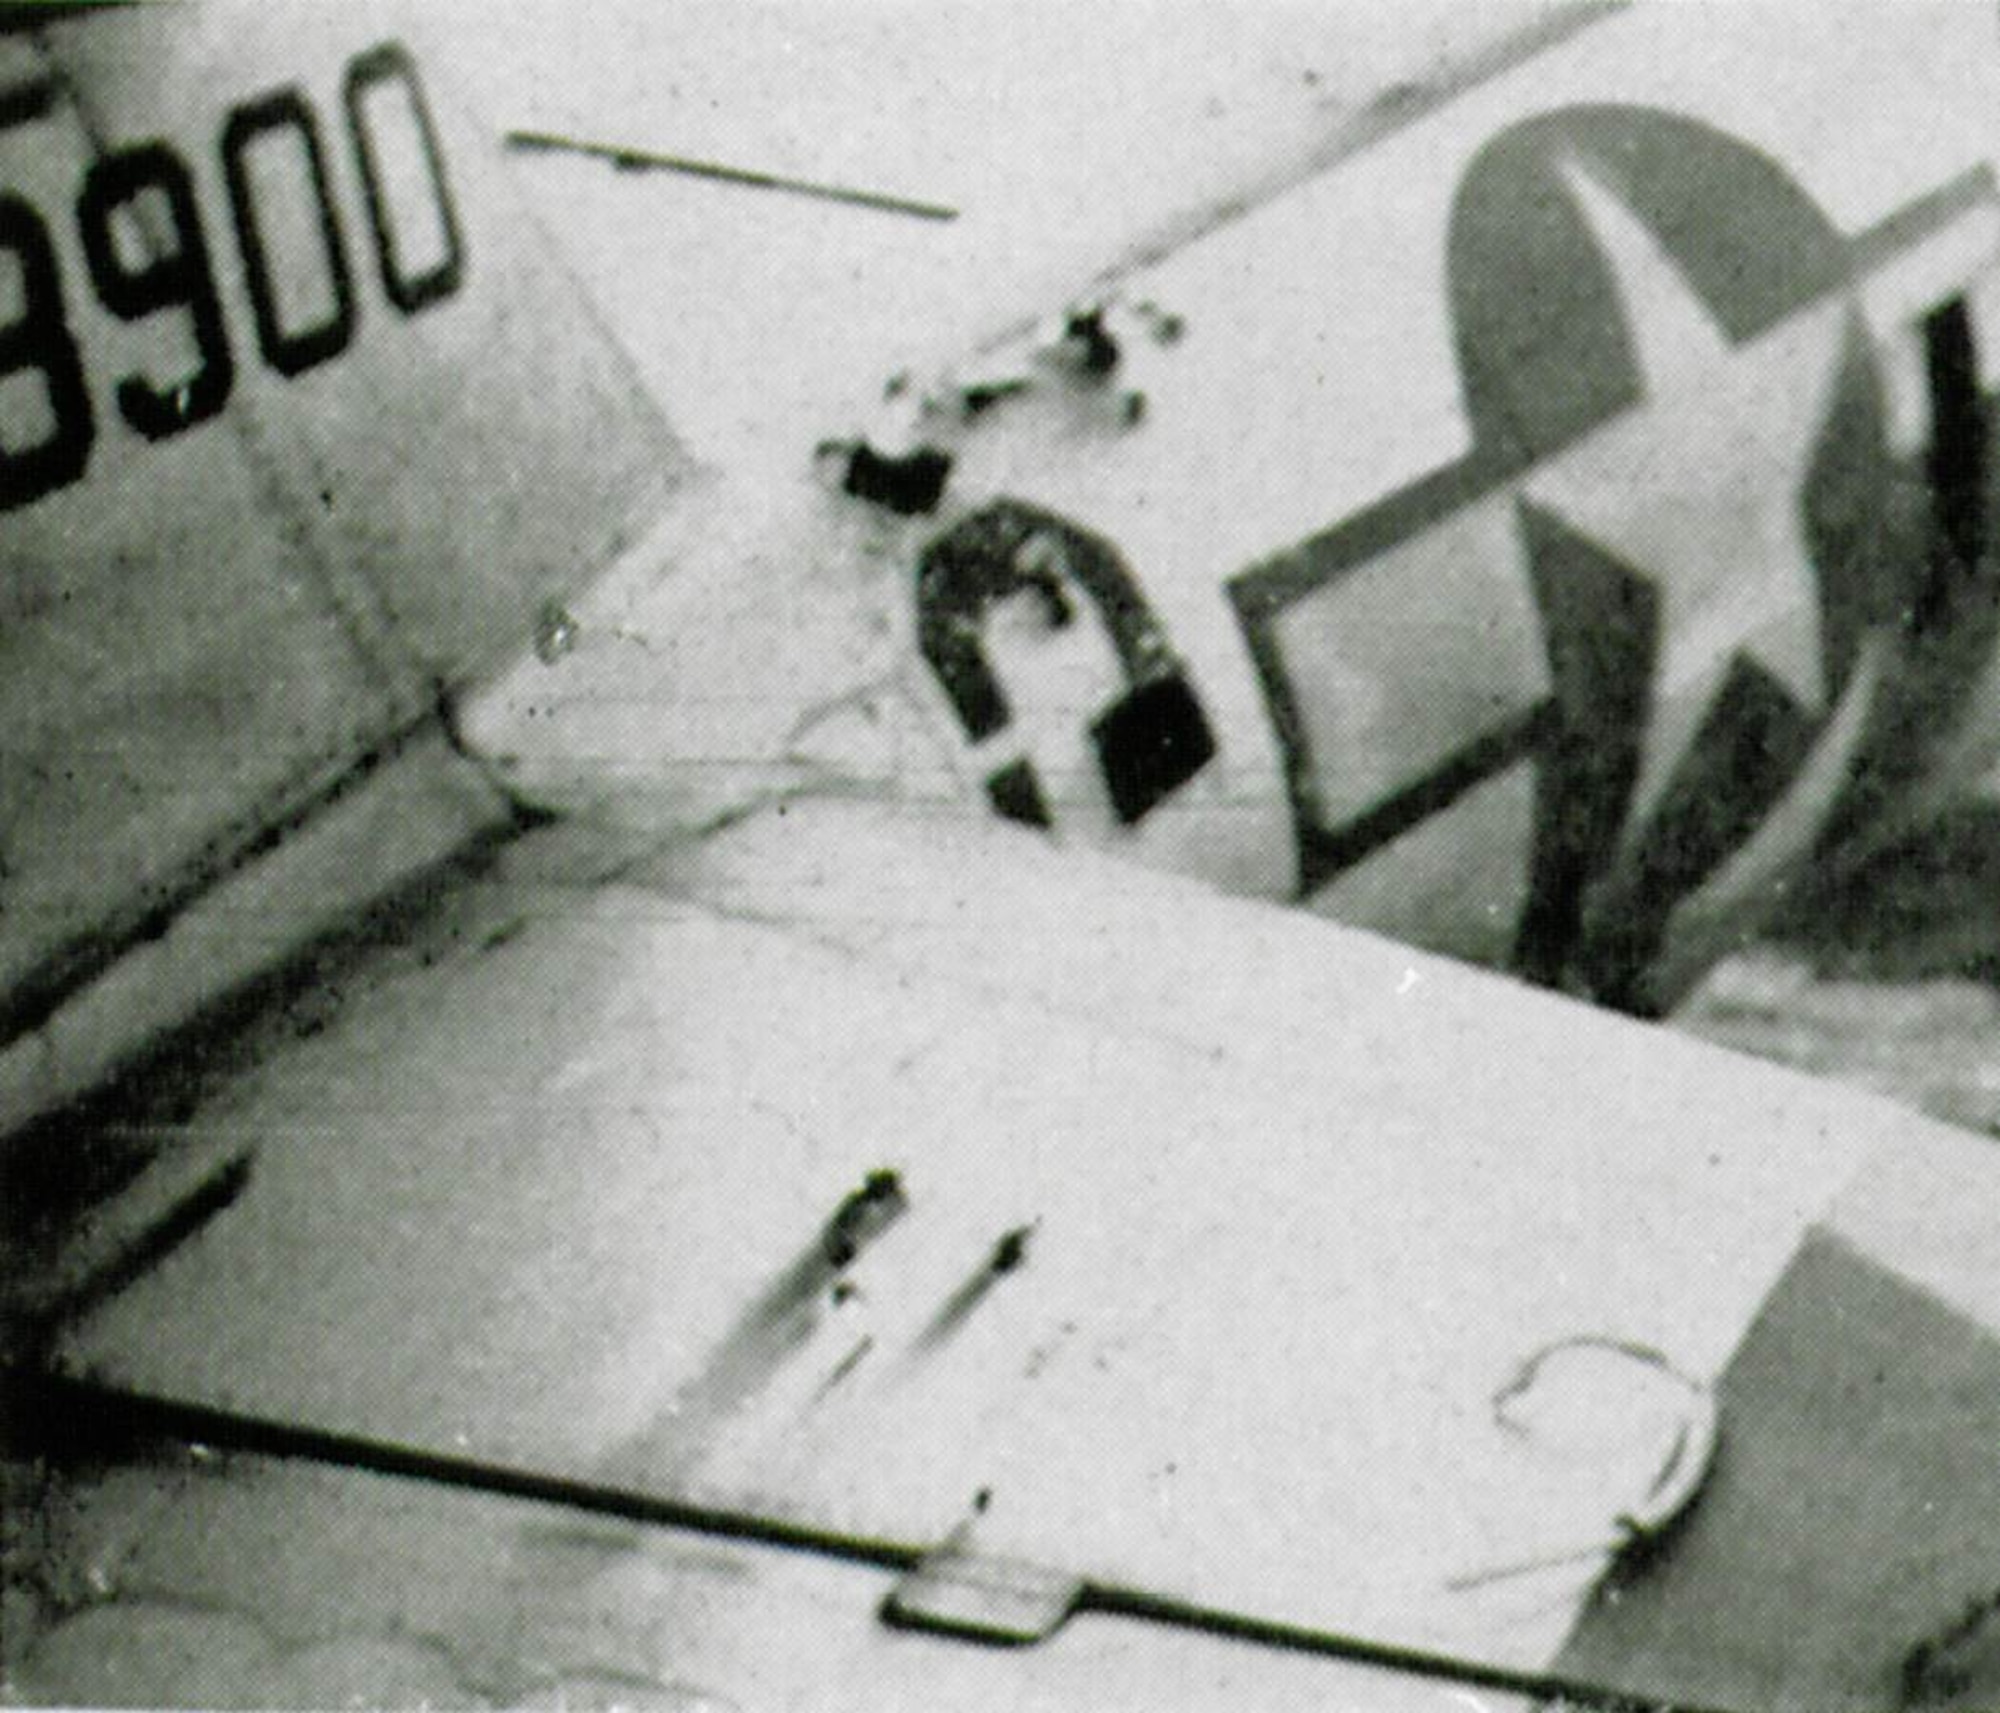 A 405th Fighter Squadron Thunderbolt, probably P-47D-28-RA serial number 42-28900, shows some battle damage from flak.  Although the holes atop the fuselage and horizontal stabilizer appear small, bullets or fragments of exploding shells could easily cause critical harm to the pilot or components inside the aircraft.  Repair of battle-damaged aircraft was an ongoing activity during the war in addition to the usual required maintenance.  (The Story of the 371st Fighter Group in the E.T.O.) 